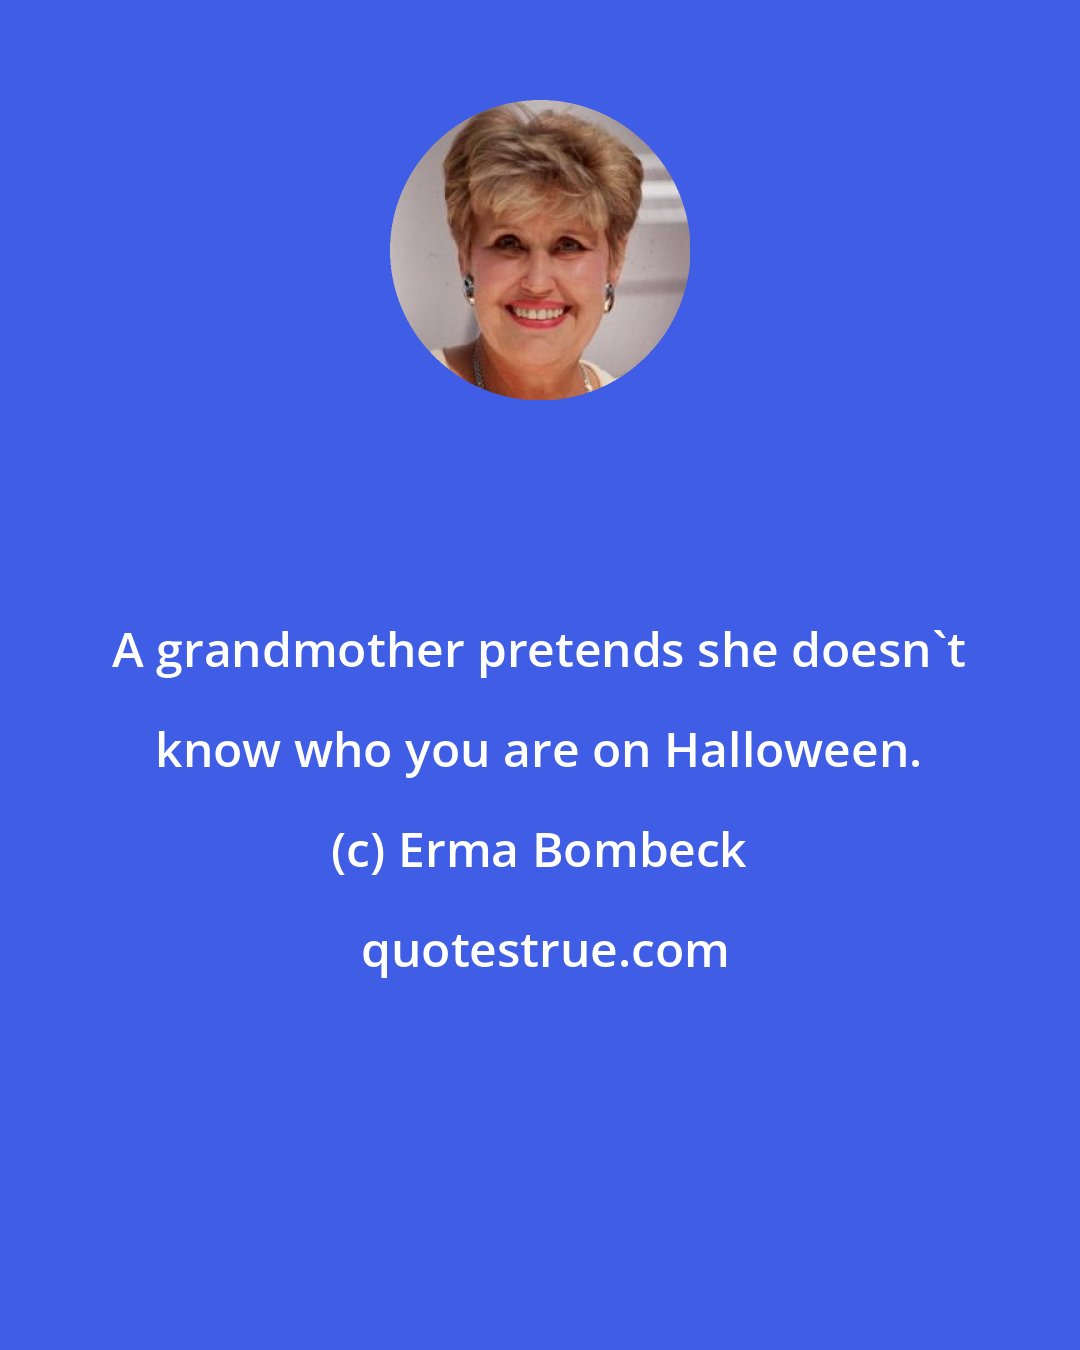 Erma Bombeck: A grandmother pretends she doesn't know who you are on Halloween.